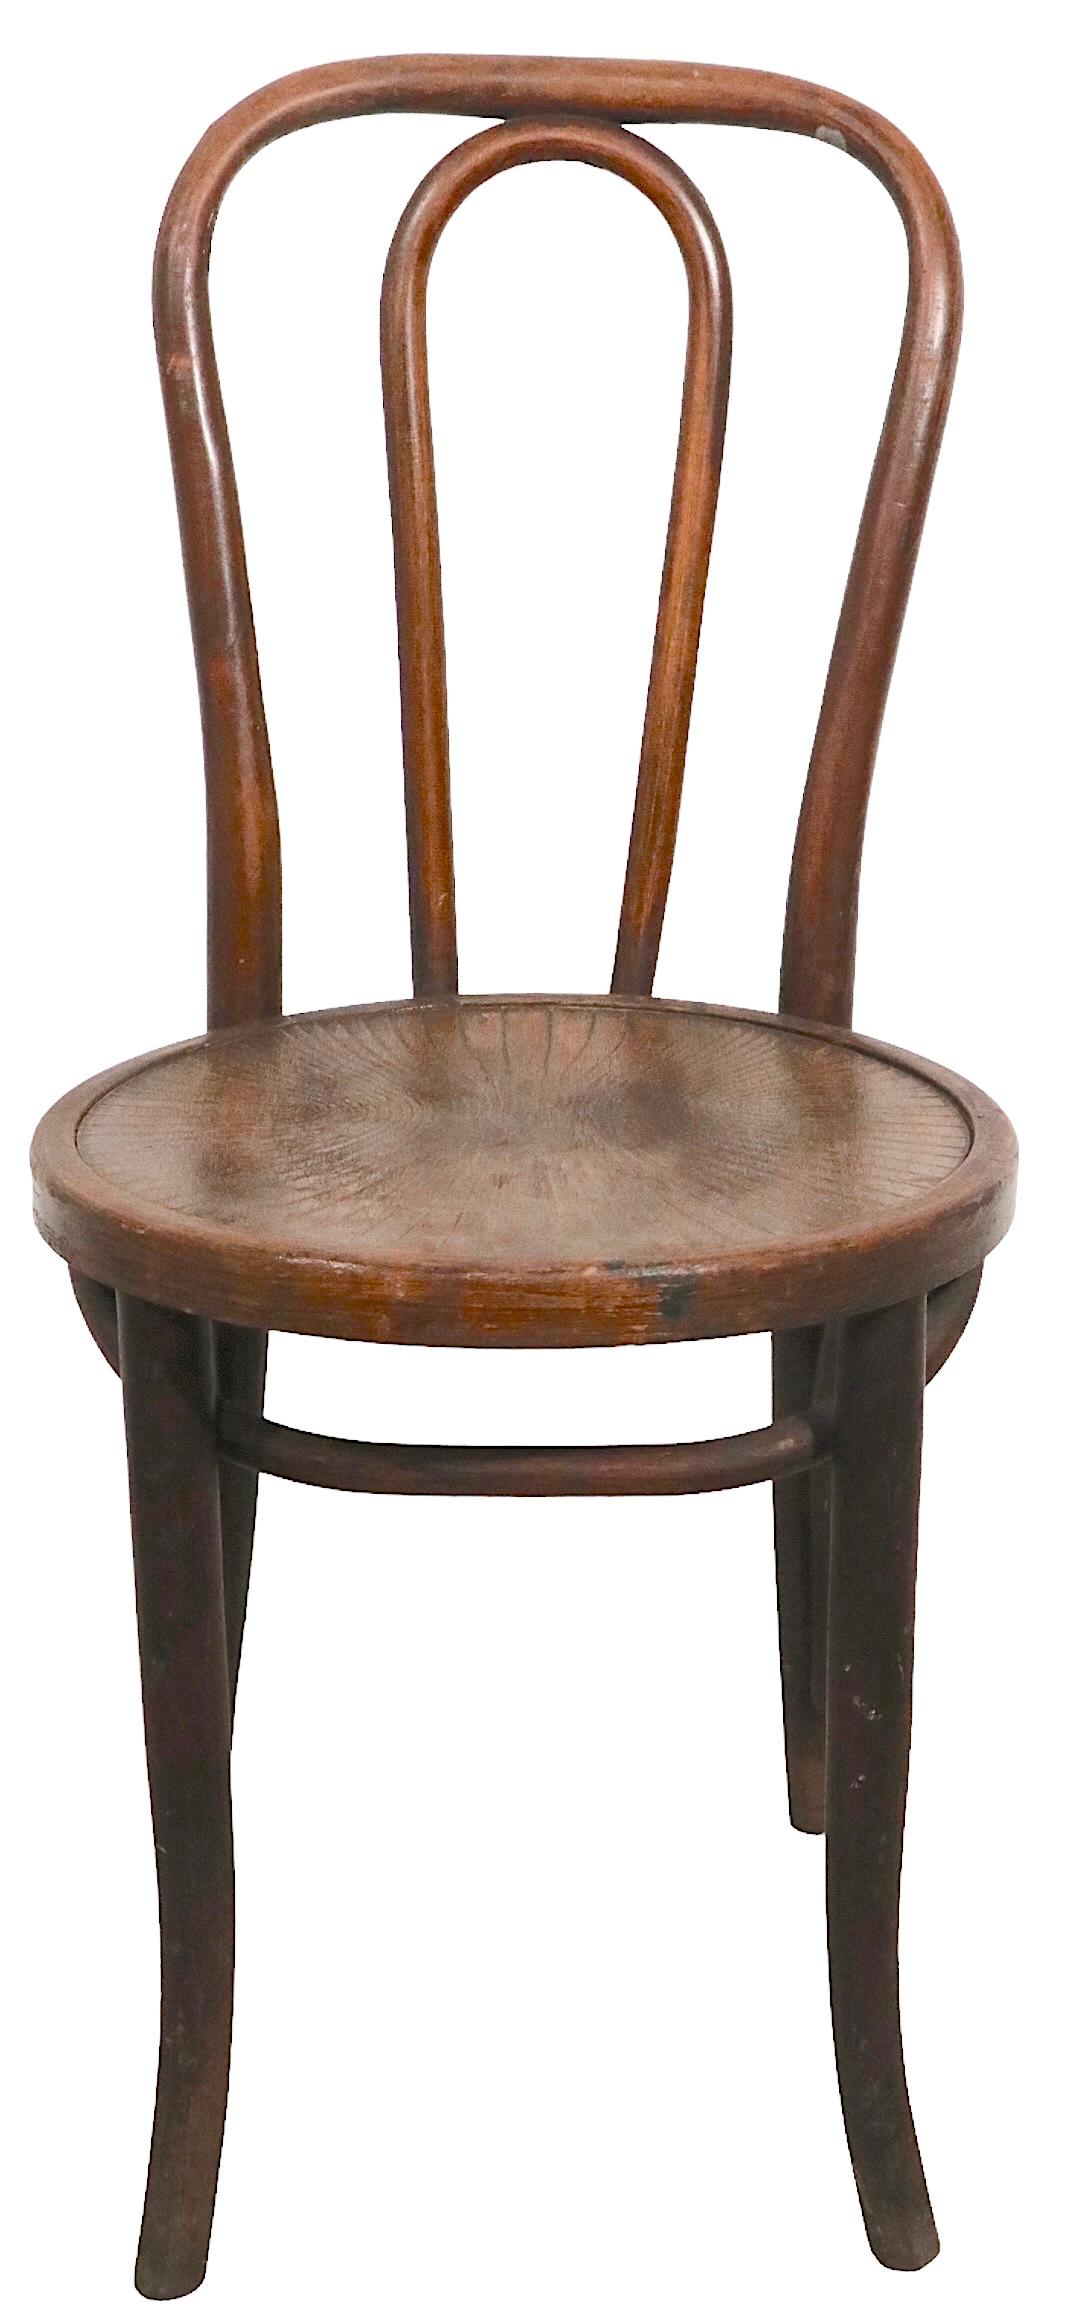 Classic bentwood side chair in the Viennese Secessionist style, circa 1920 - 1950. The chair is in good, original, estate condition, sturdy and stable, showing cosmetic wear to finish, and general signs of age. Possibly Thonet, Kohn, Fishel etc,